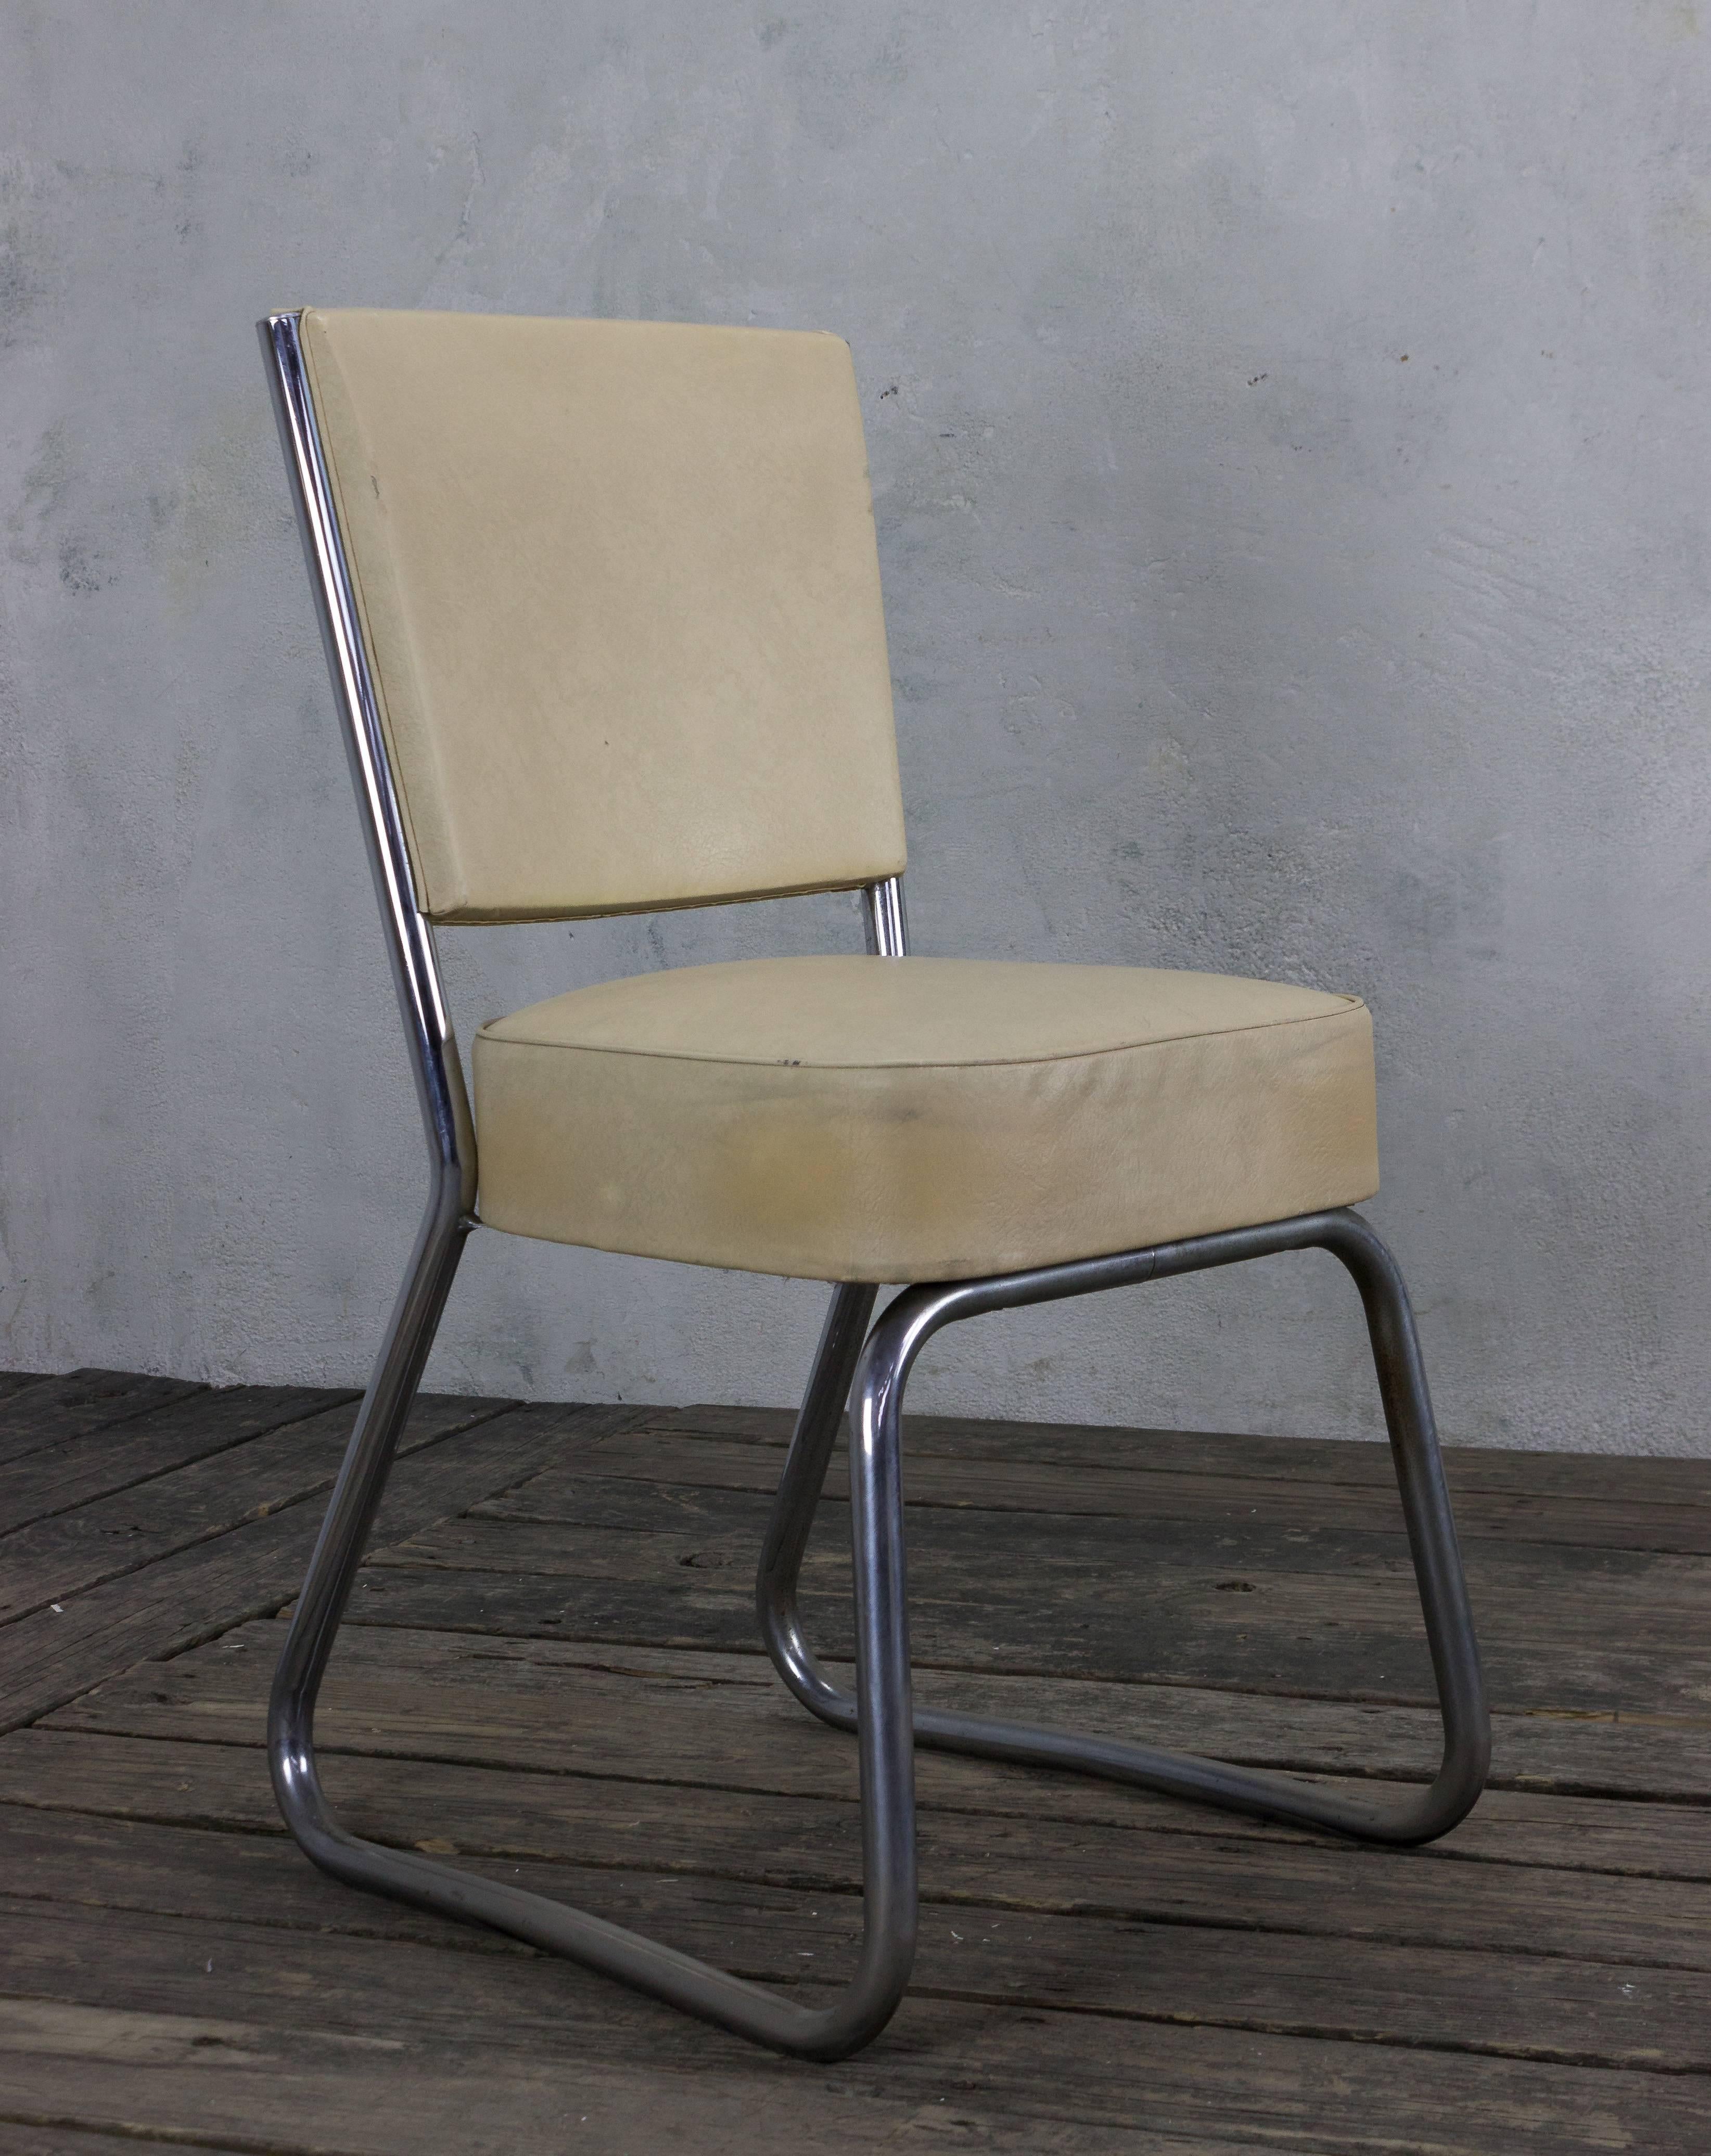 A fabulous set of four chrome and vinyl chairs. Make a bold mid-century statement with this set of four chairs, including three side chairs and one armchair. The ensemble is made from chrome-plated tubular steel frames and still has the original